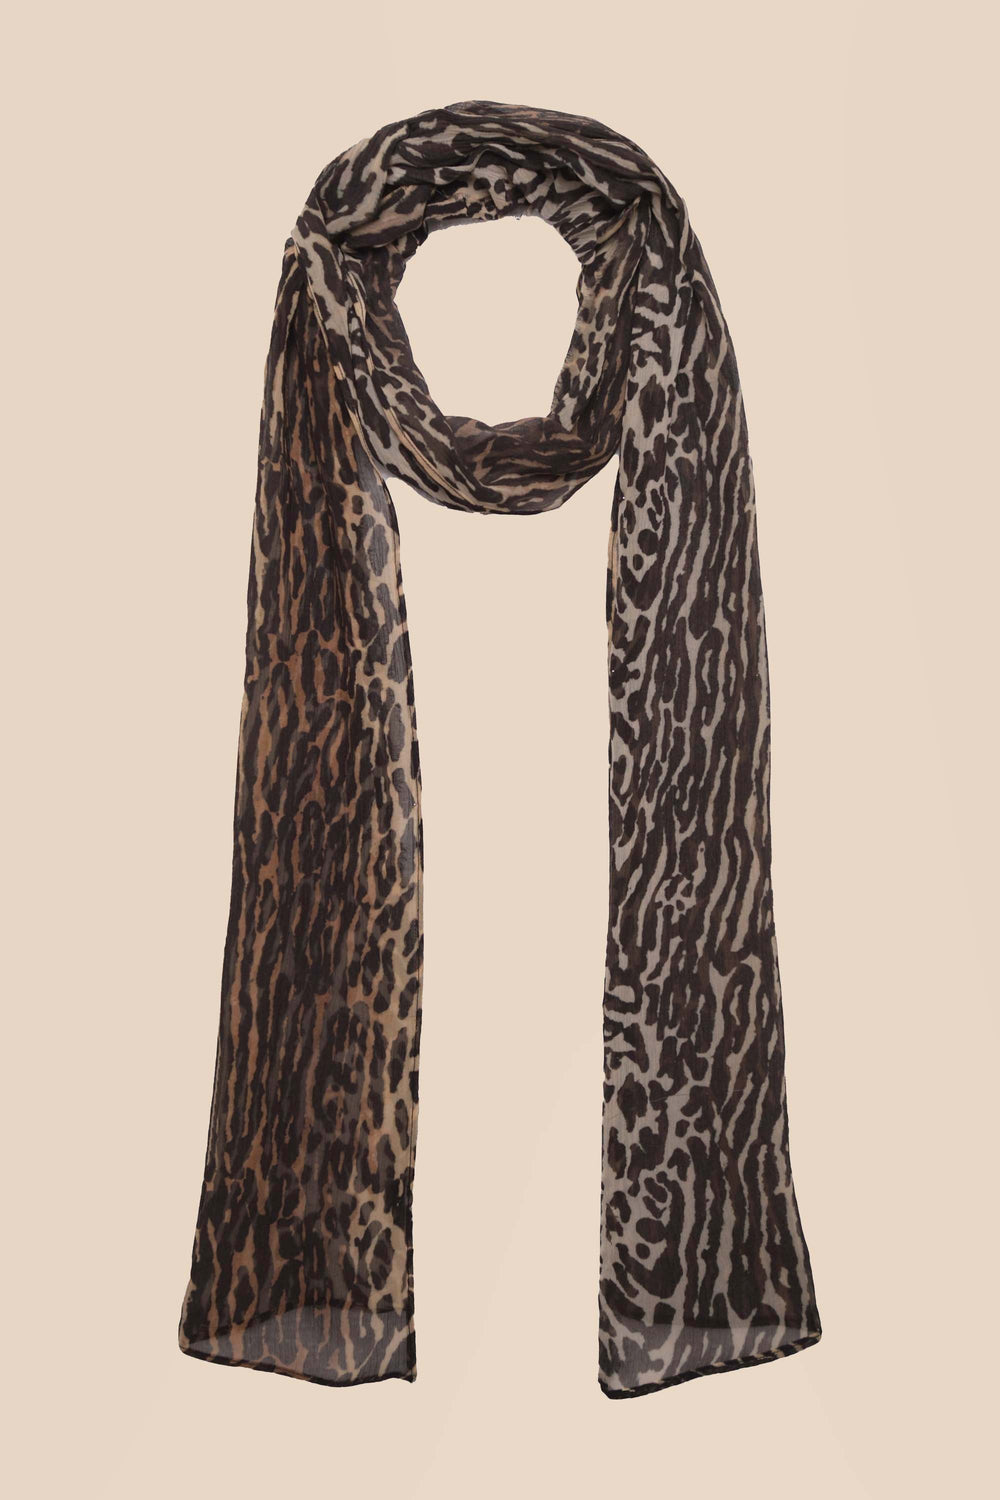 The Rixo Julien scarf adds a spot of leopard print to a dull outfit (we don't do those), clashes beautifully with printed dresses (our speciality), and you know we do many pieces that match. Our Bohemia Leopard counts as a neutral in RIXO's world.